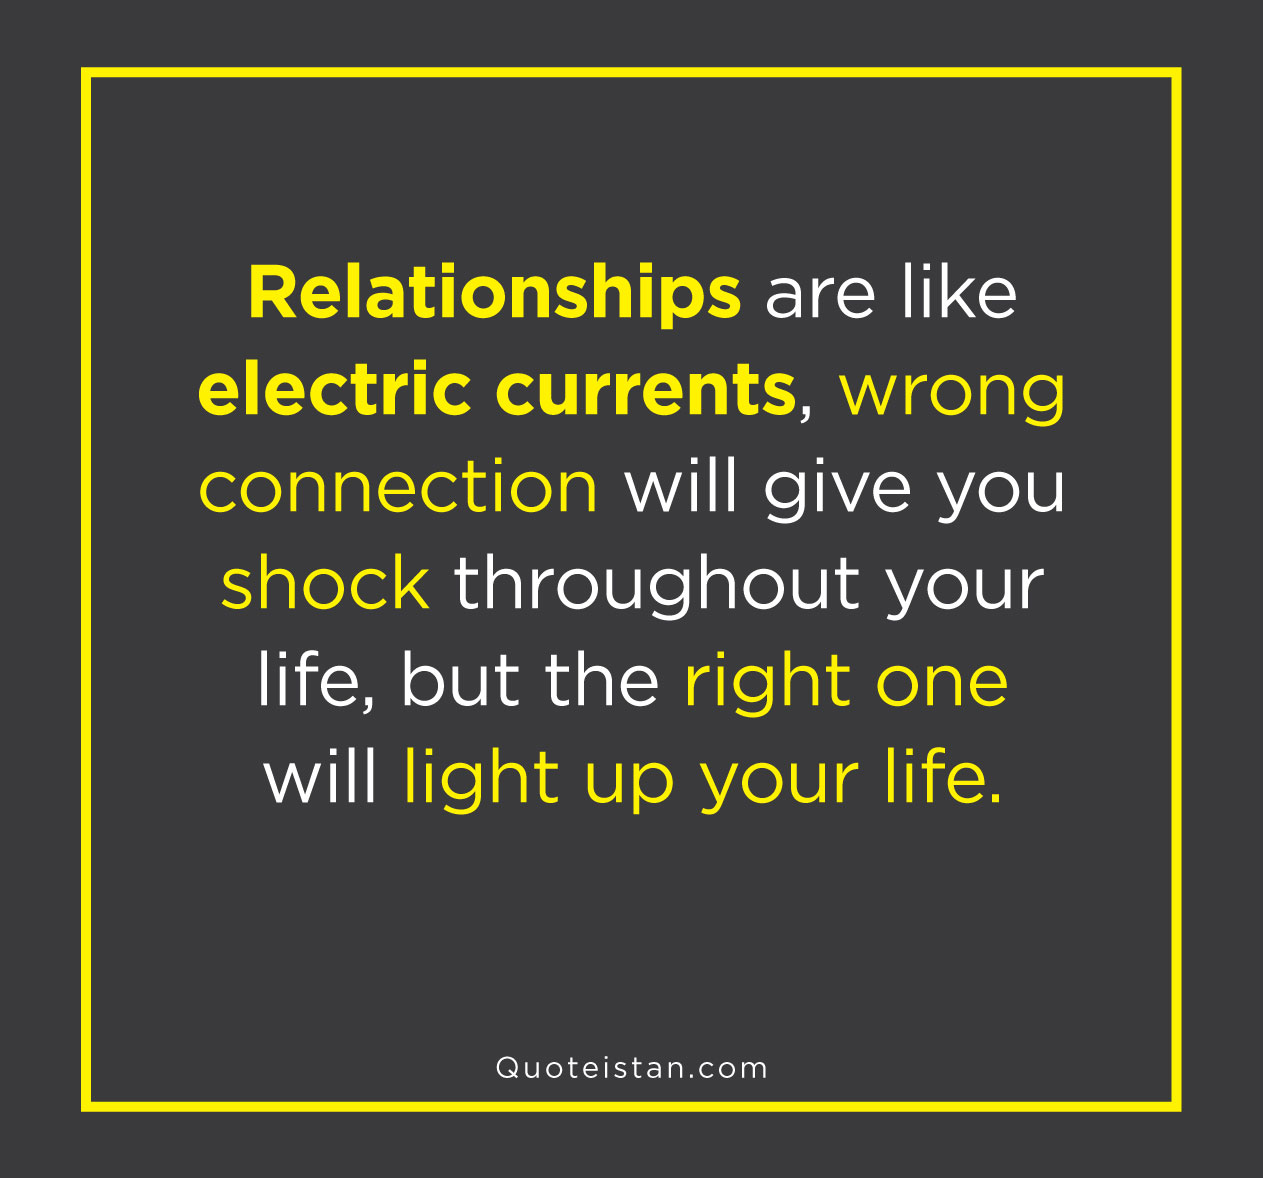 Relationships are like electric currents, wrong connection will give you shock throughout your life, but the right one will light up your life.